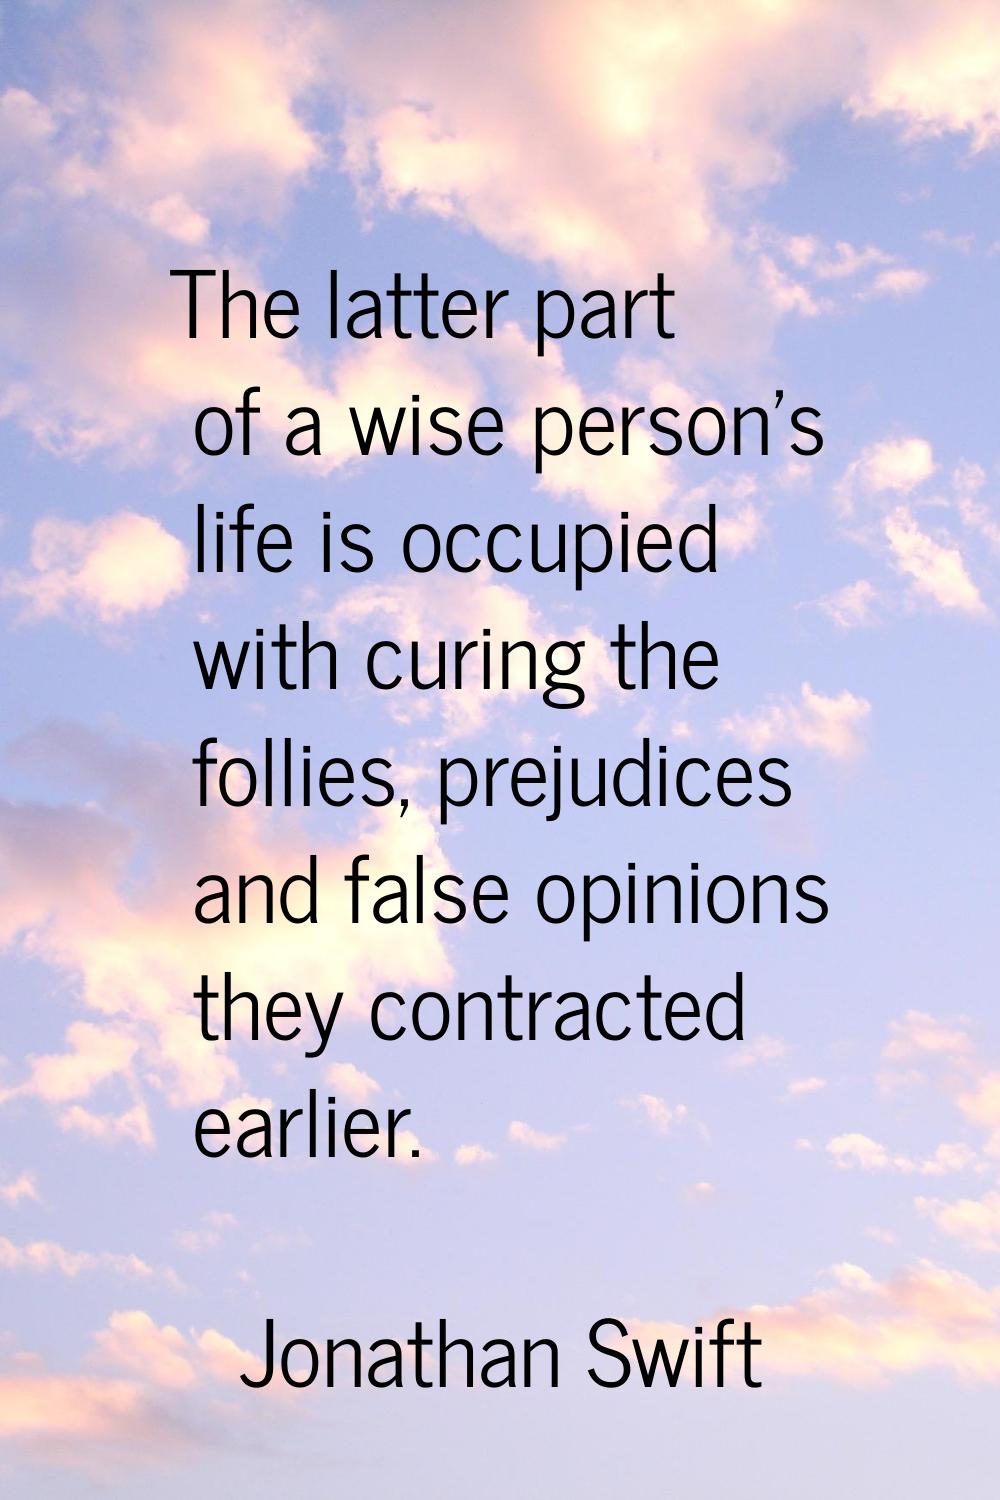 The latter part of a wise person's life is occupied with curing the follies, prejudices and false o